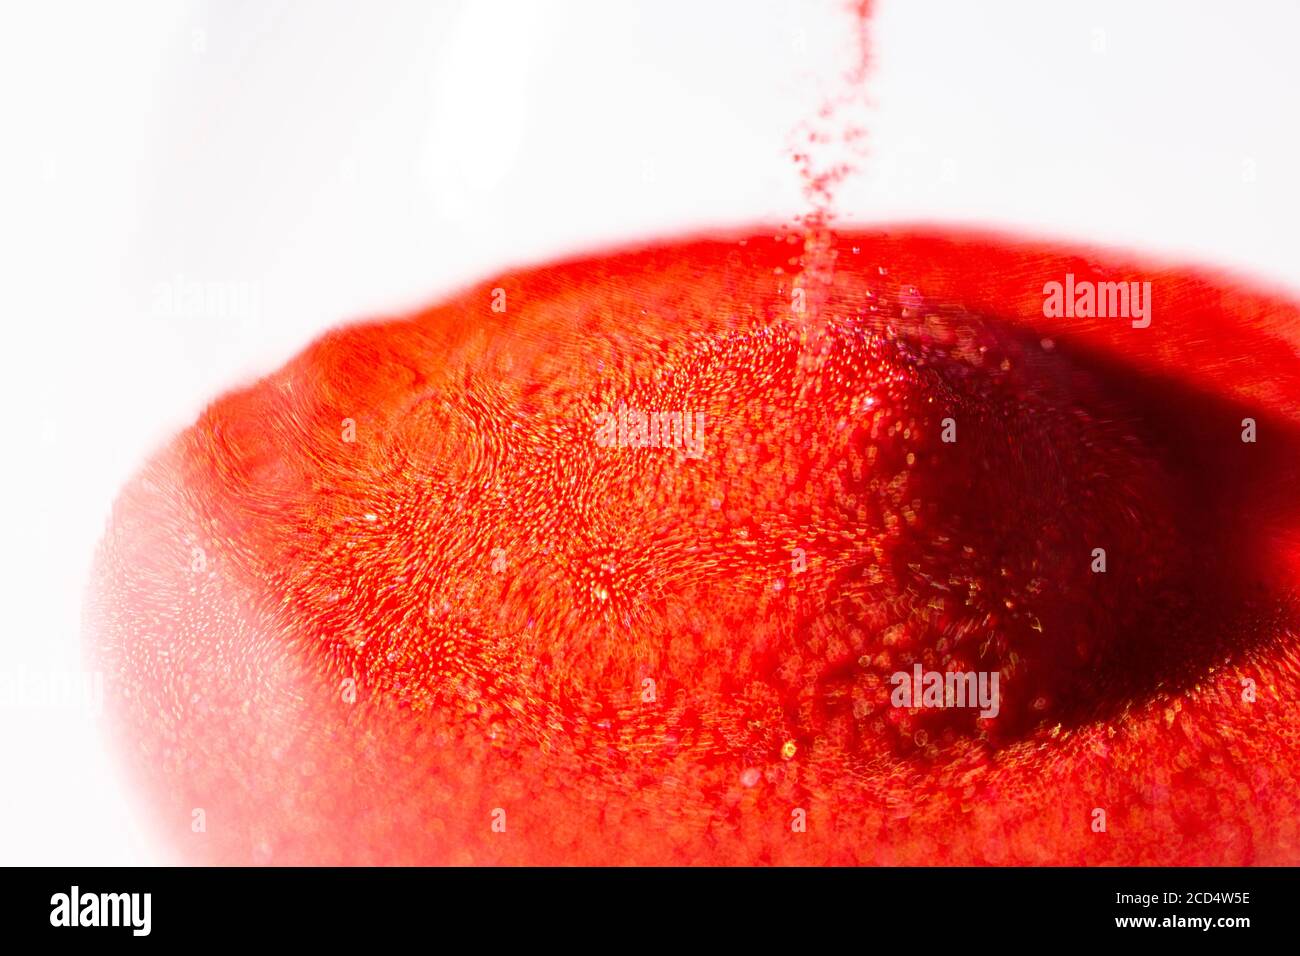 hourglass with red sand used to measure time flow, macro photography Stock Photo